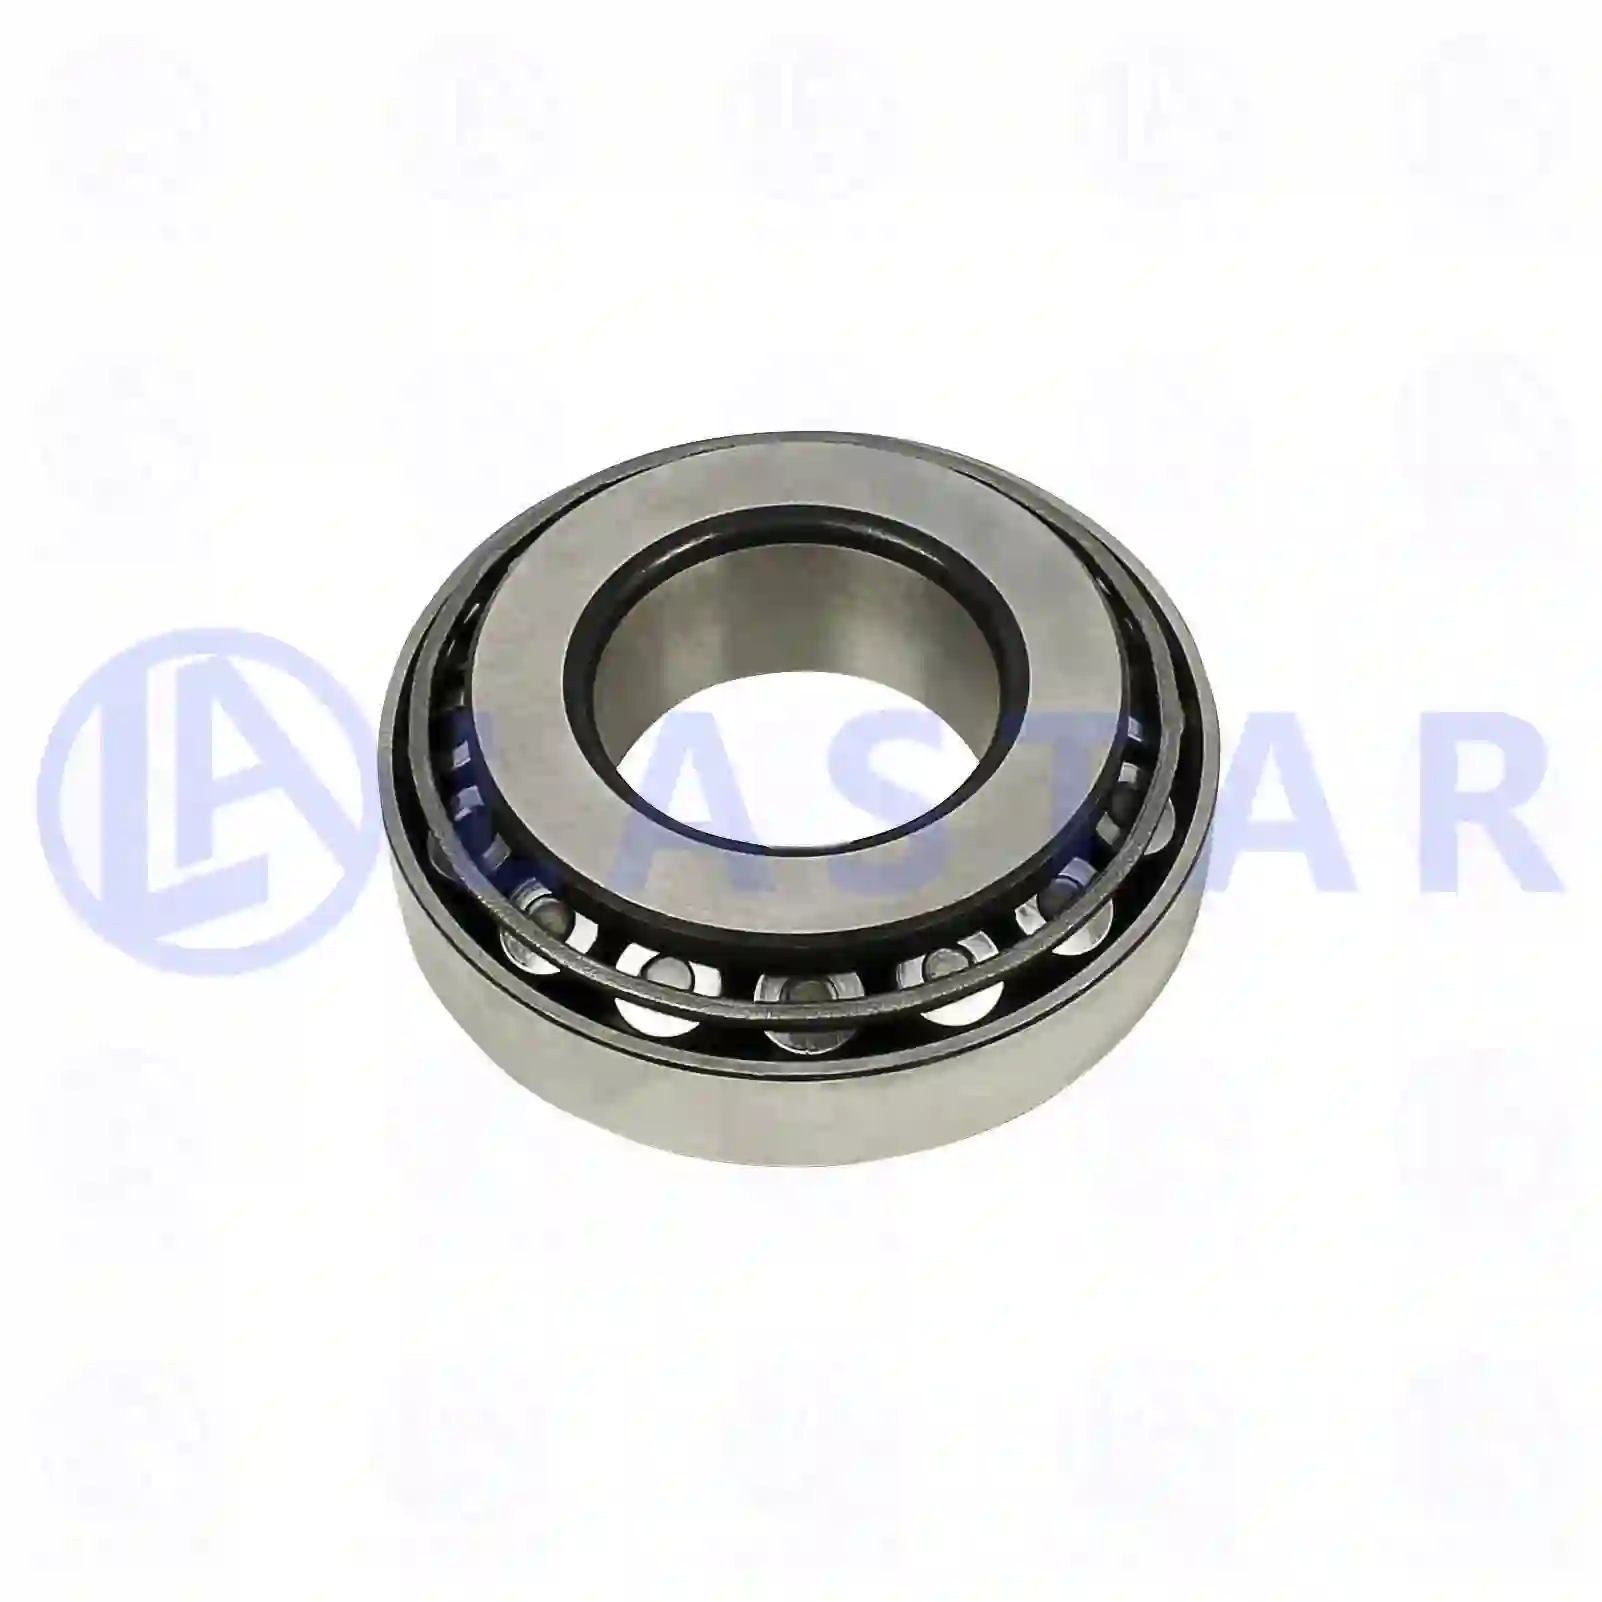 Rear Axle, Complete Tapered roller bearing, la no: 77730370 ,  oem no:1400213, 81934200165, 81934200216, 81934200232, 0BA409123C Lastar Spare Part | Truck Spare Parts, Auotomotive Spare Parts